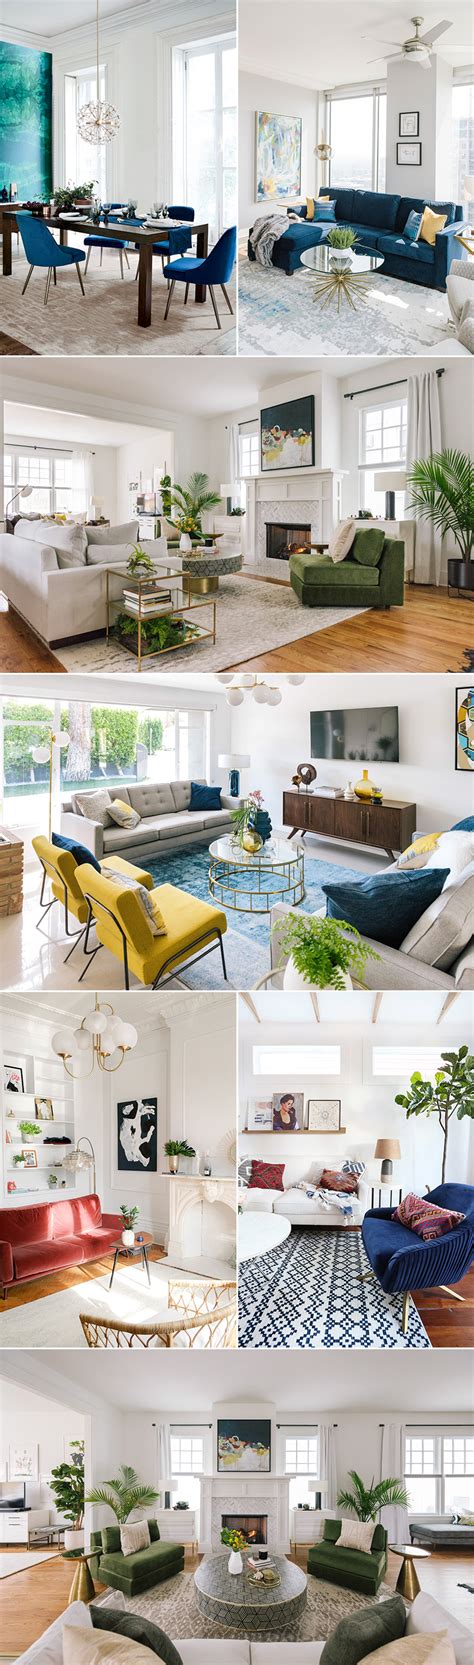 6 Modern Home Décor Trends Of 2019 Interior Design Styles Defined